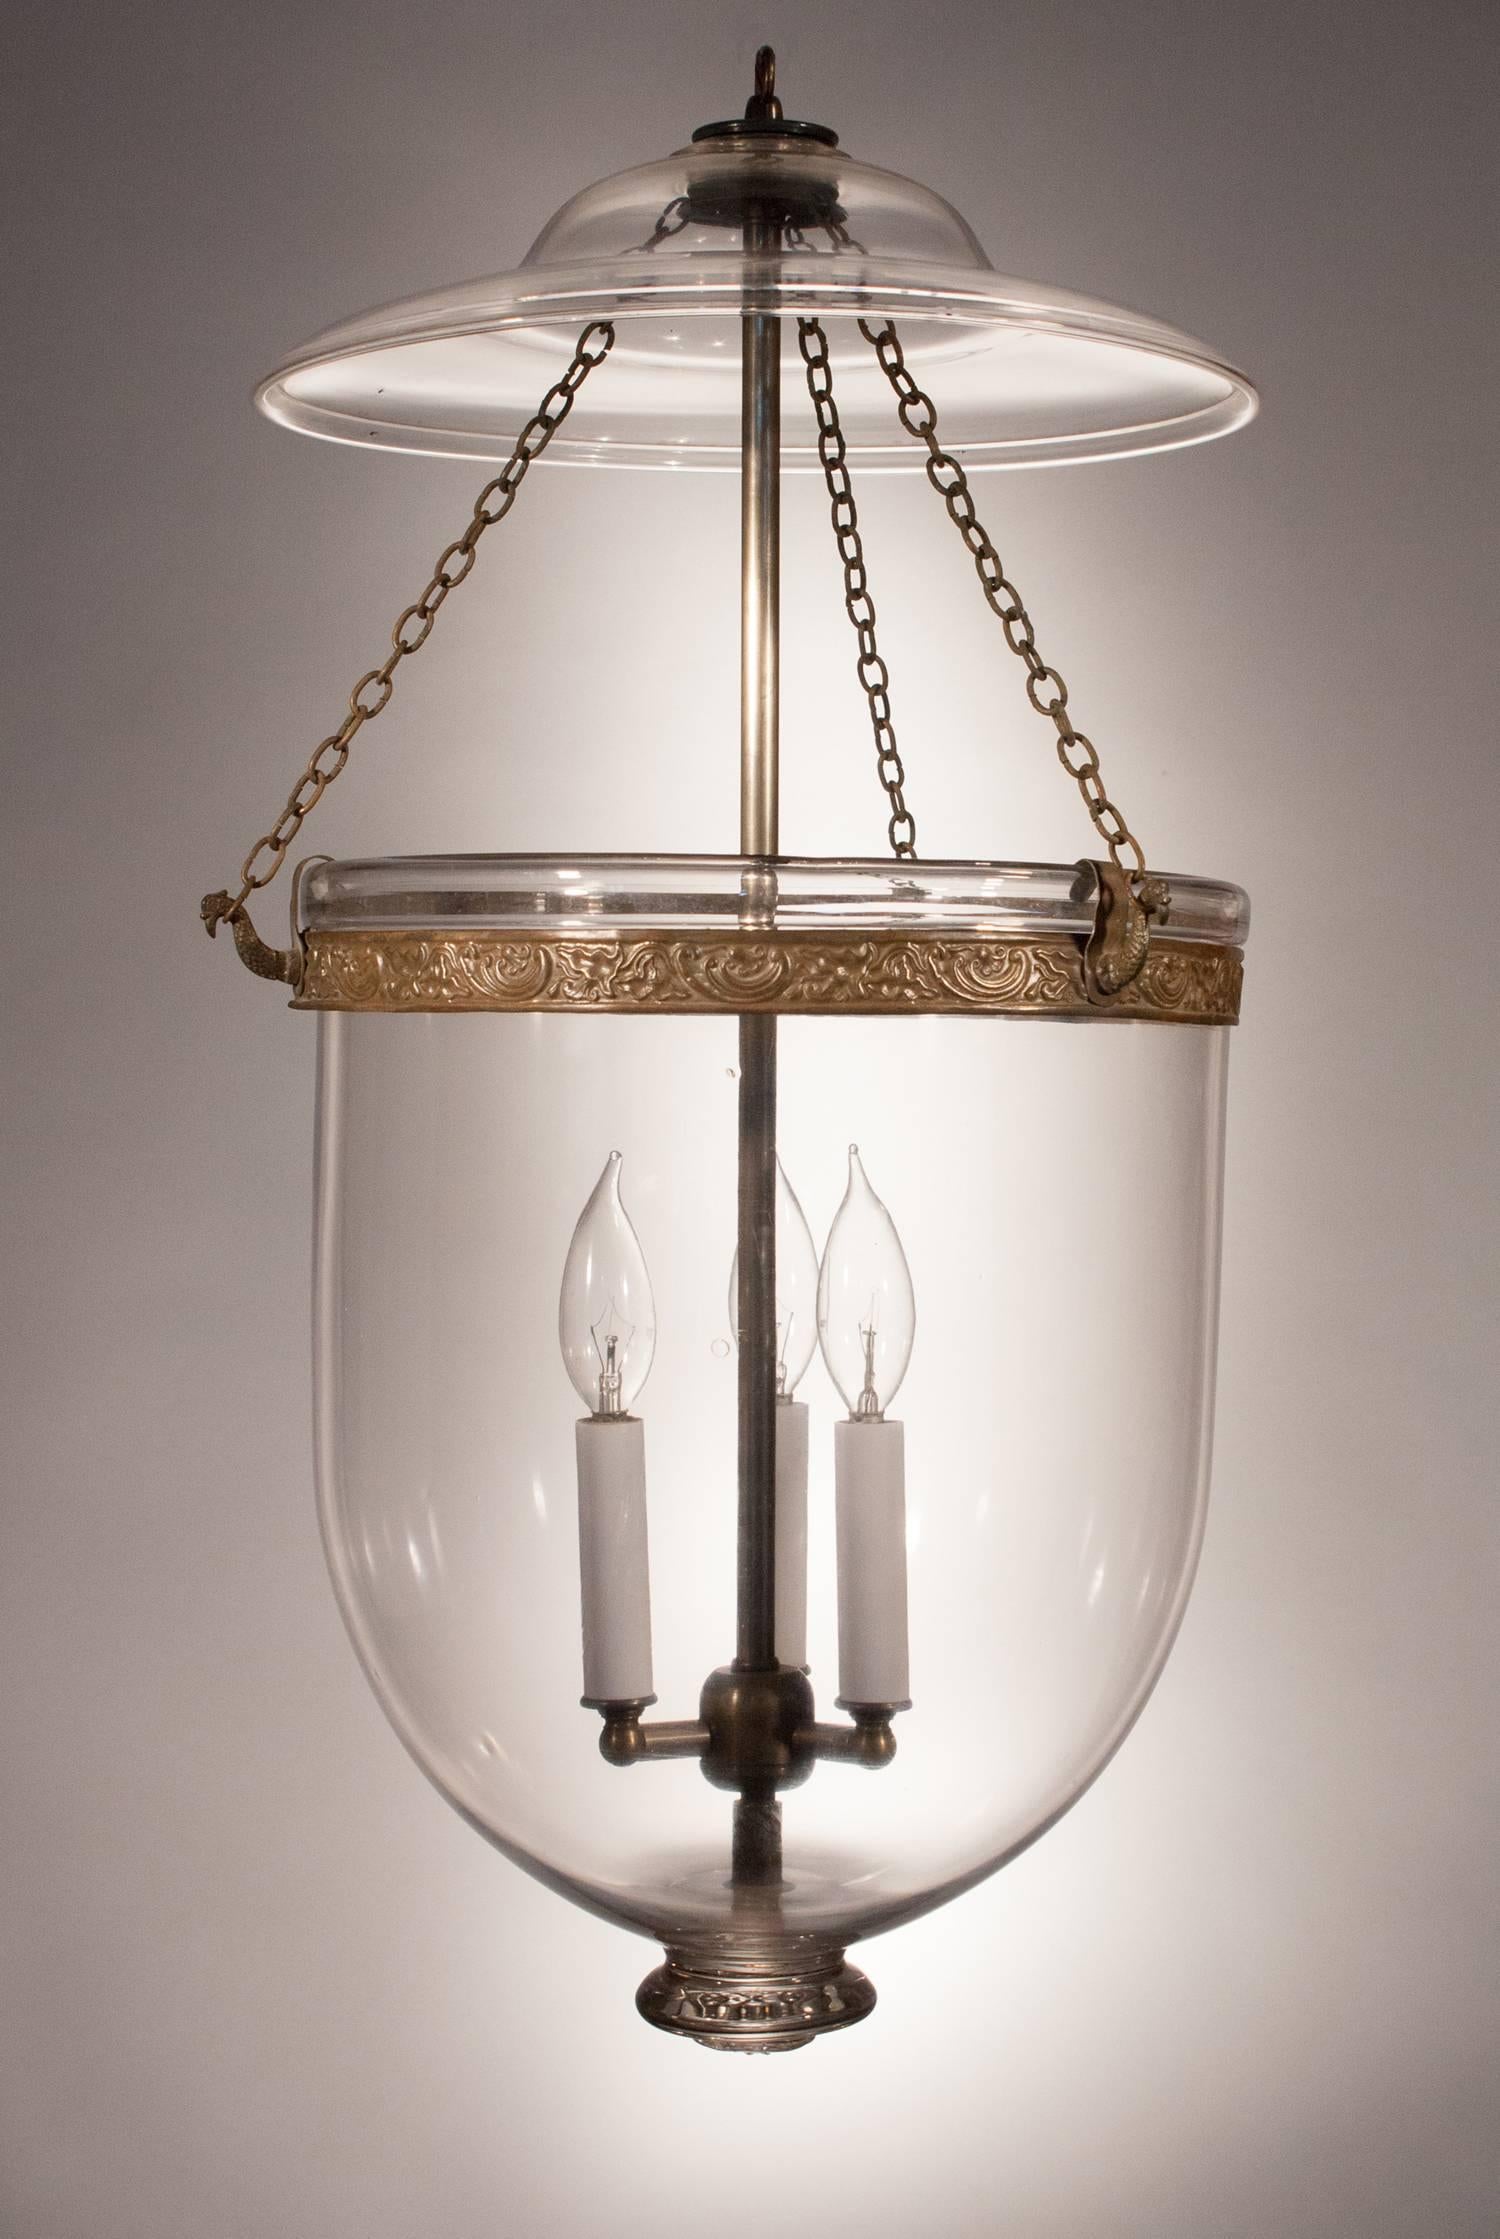 Generously sized and amply shaped, this antique English bell jar lantern features its original smoke bell and authentic brass band and chain. The pendant's proportions are superb, as is the clarity and quality of the hand blown glass. An especially